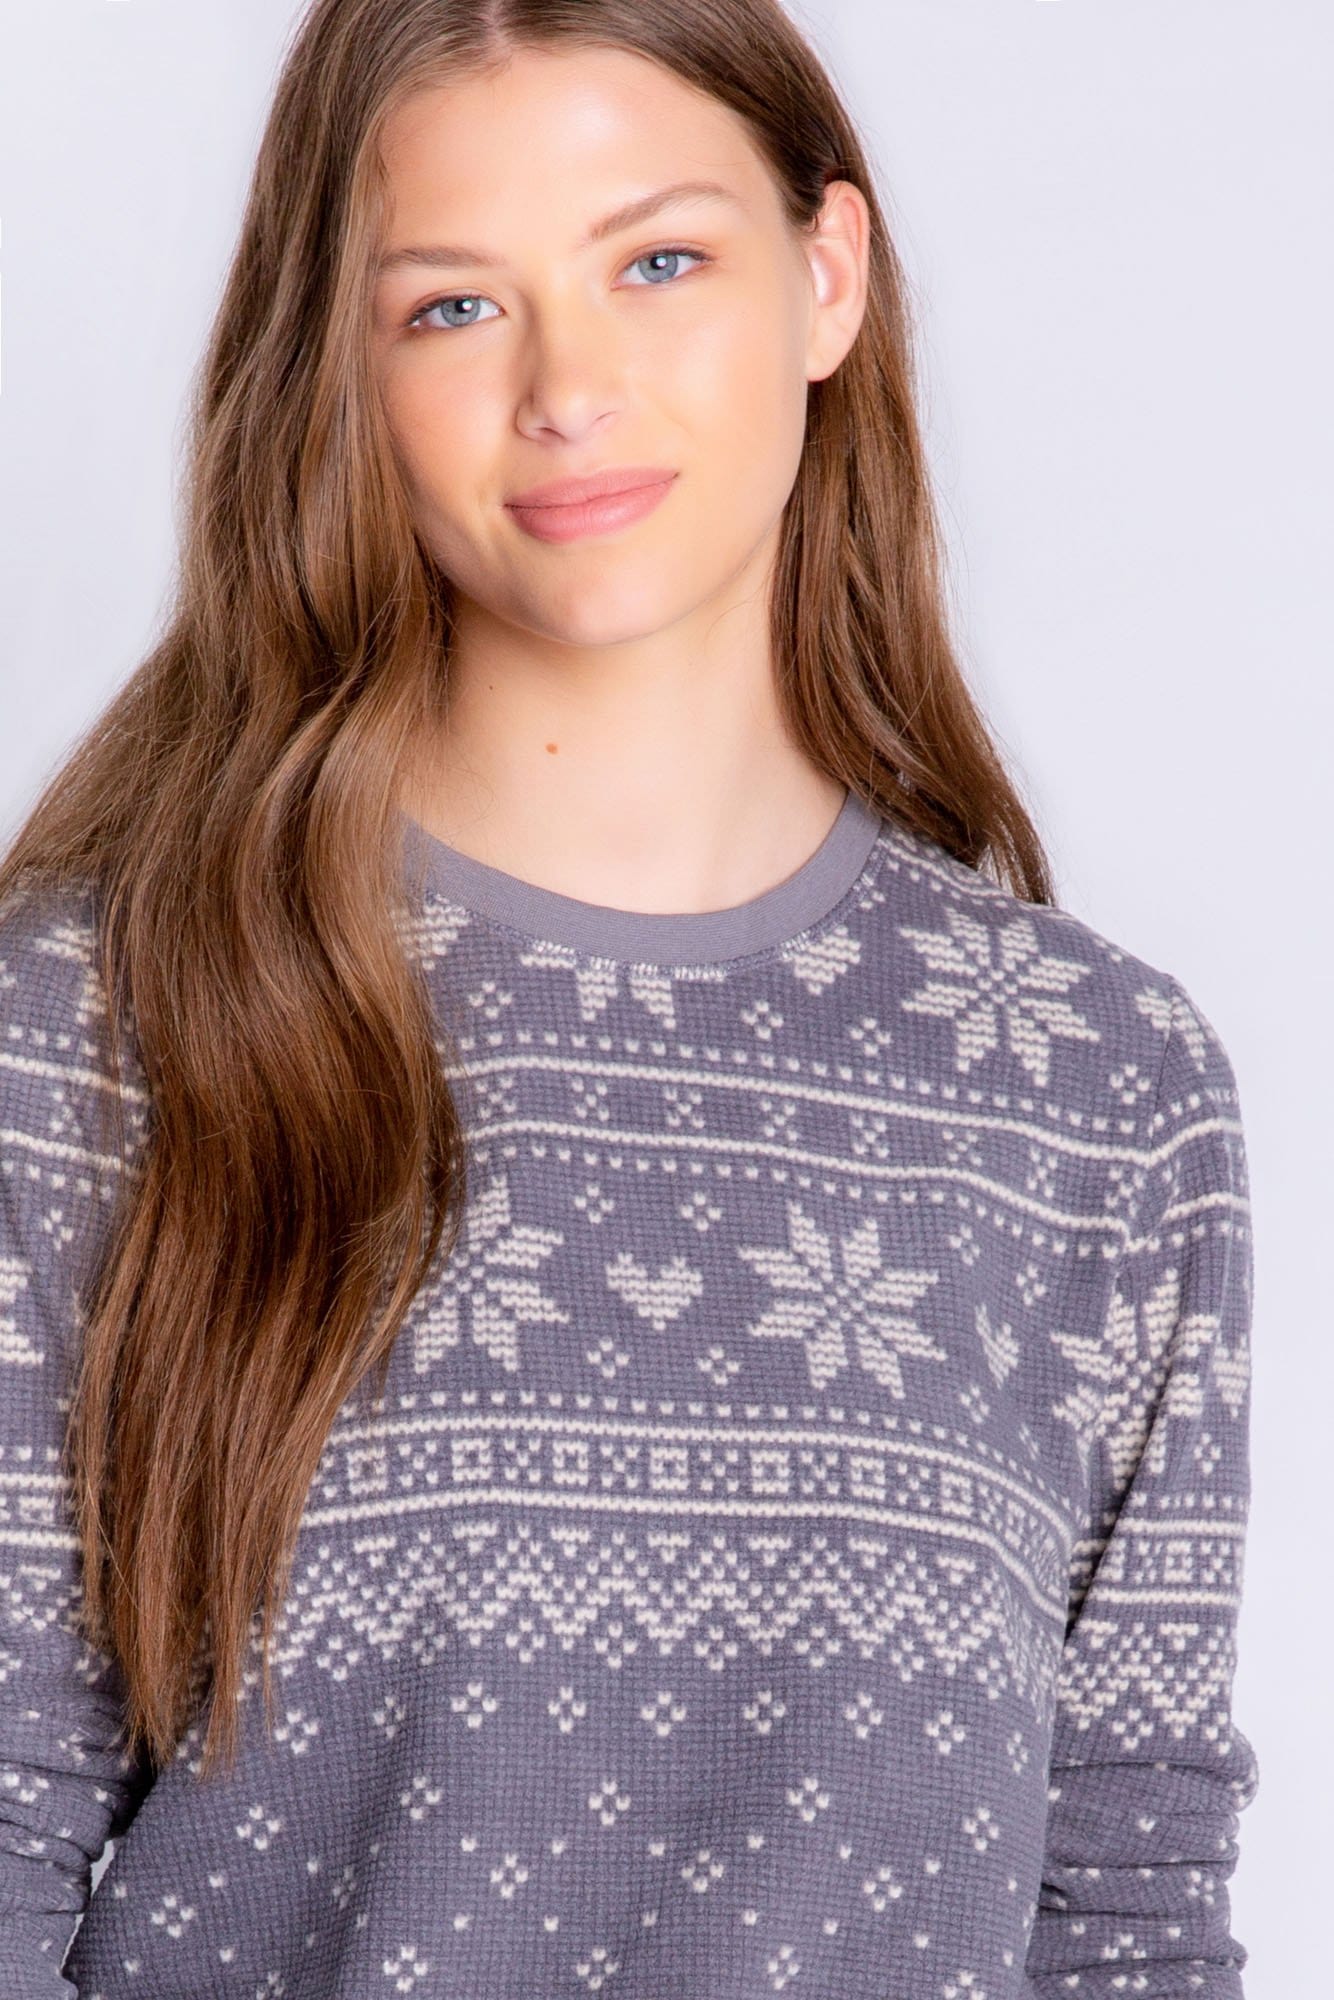 PJ Salvage Frosted Fairisle Long Sleeve Top